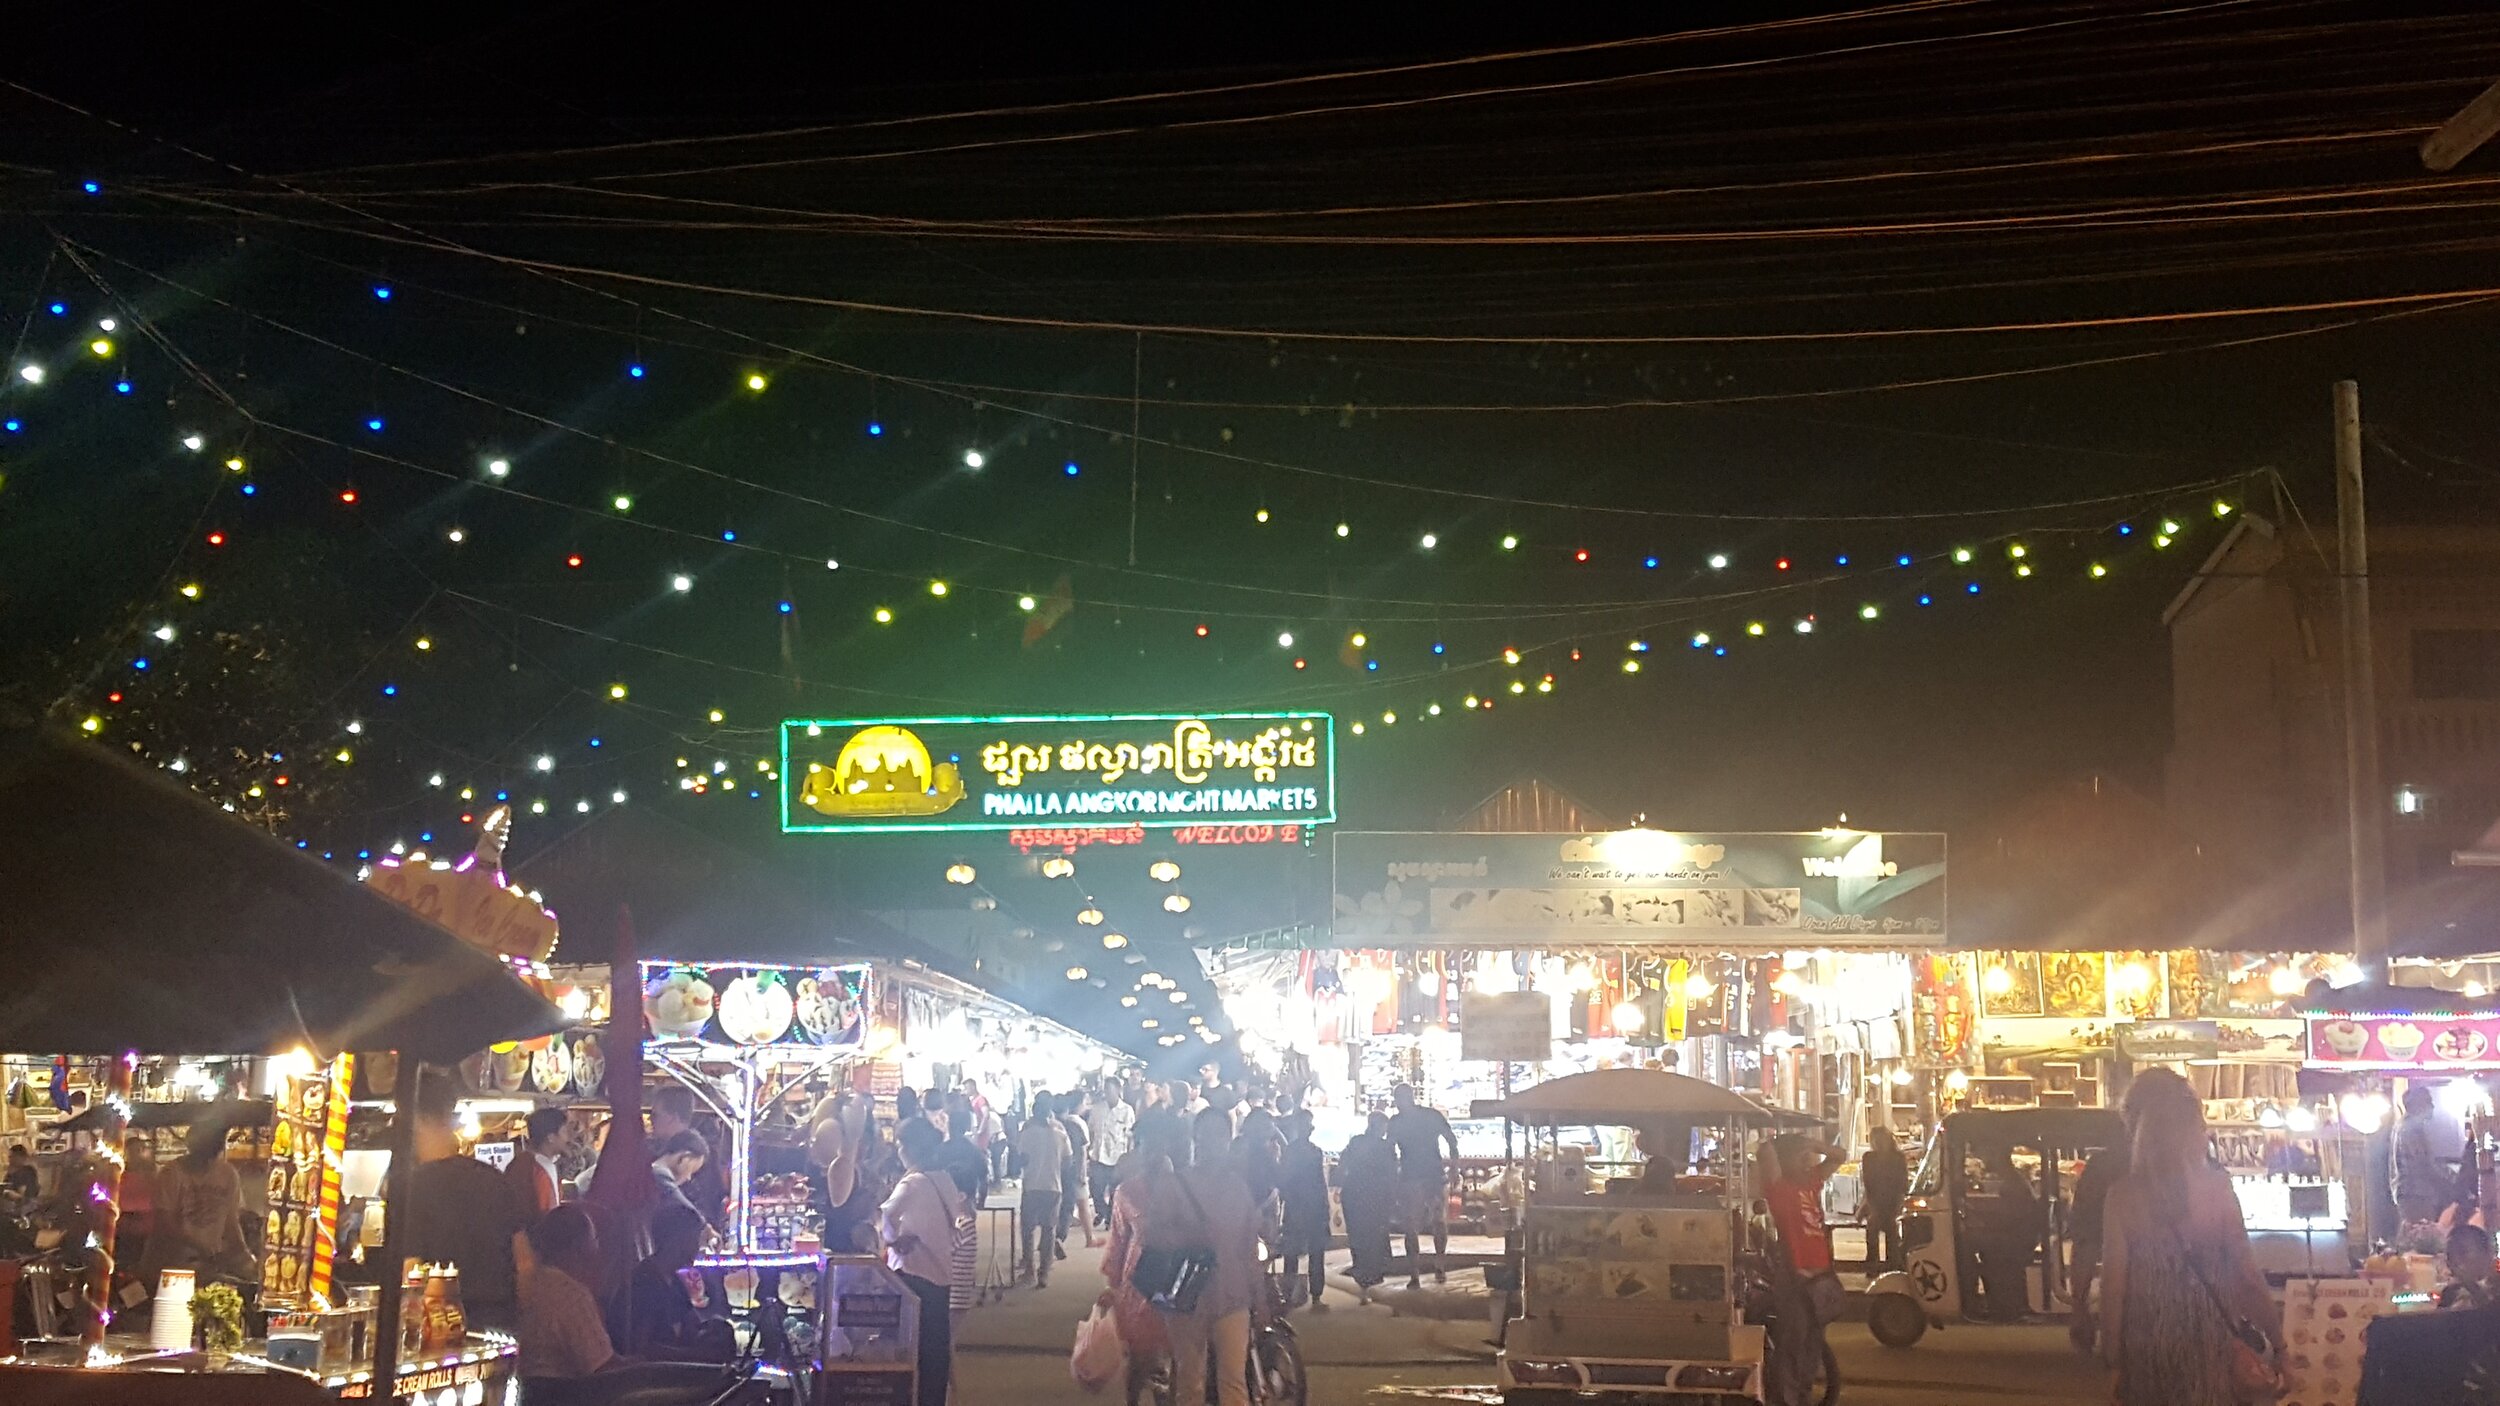 Just one of the few night markets